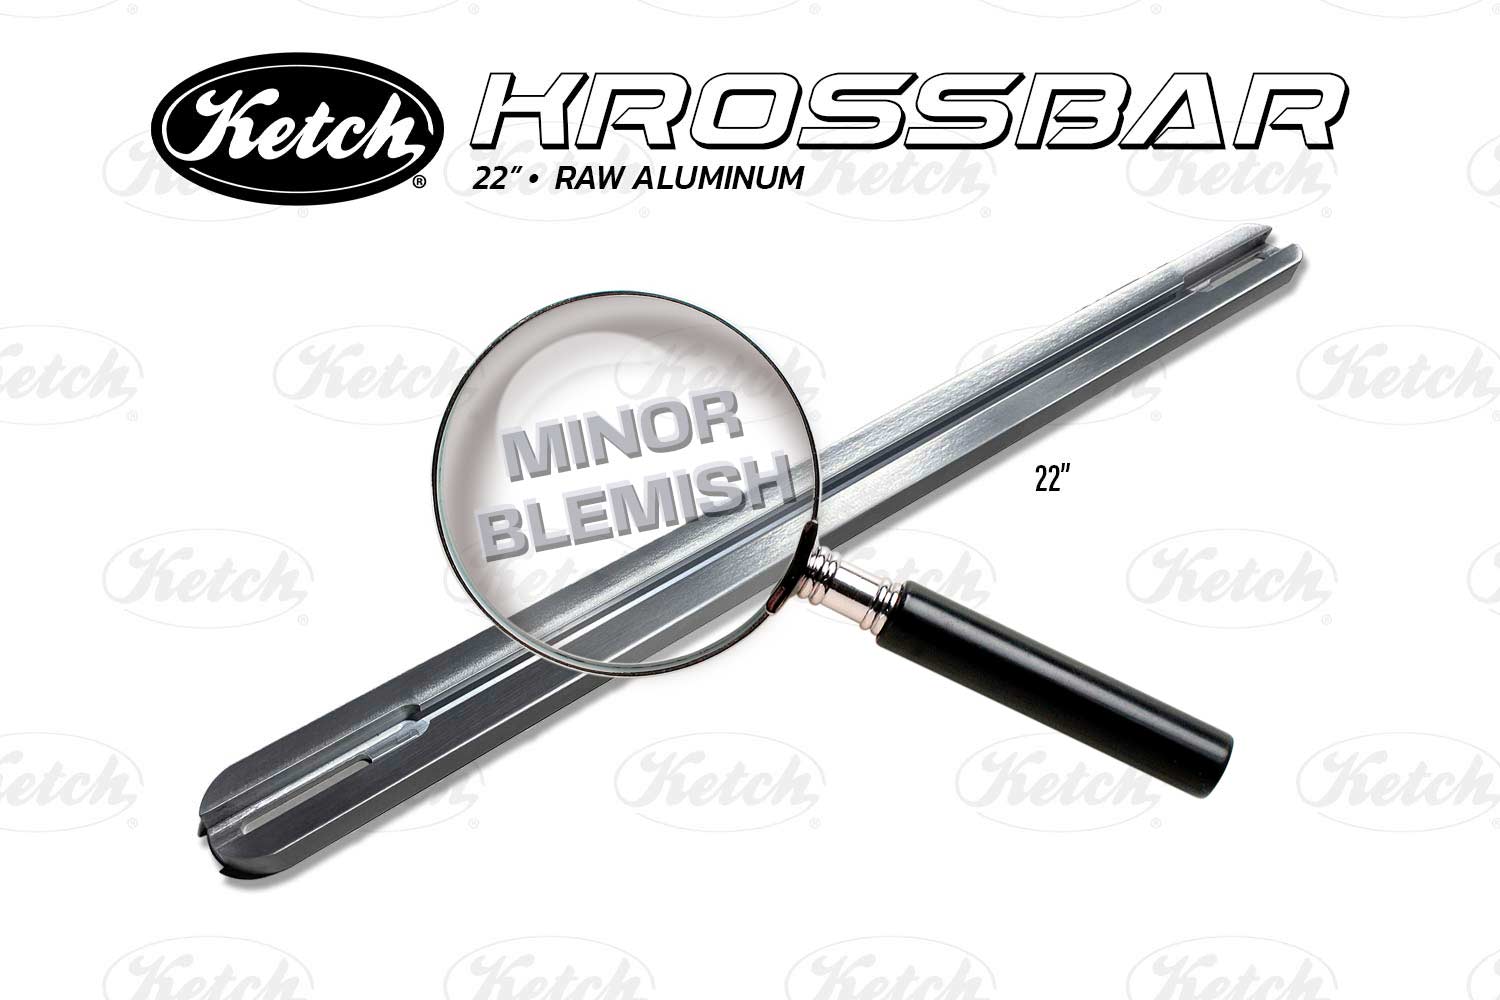 Ketch Krossbar in 26 inch size and raw aluminum with minor cosmetic blemishes.